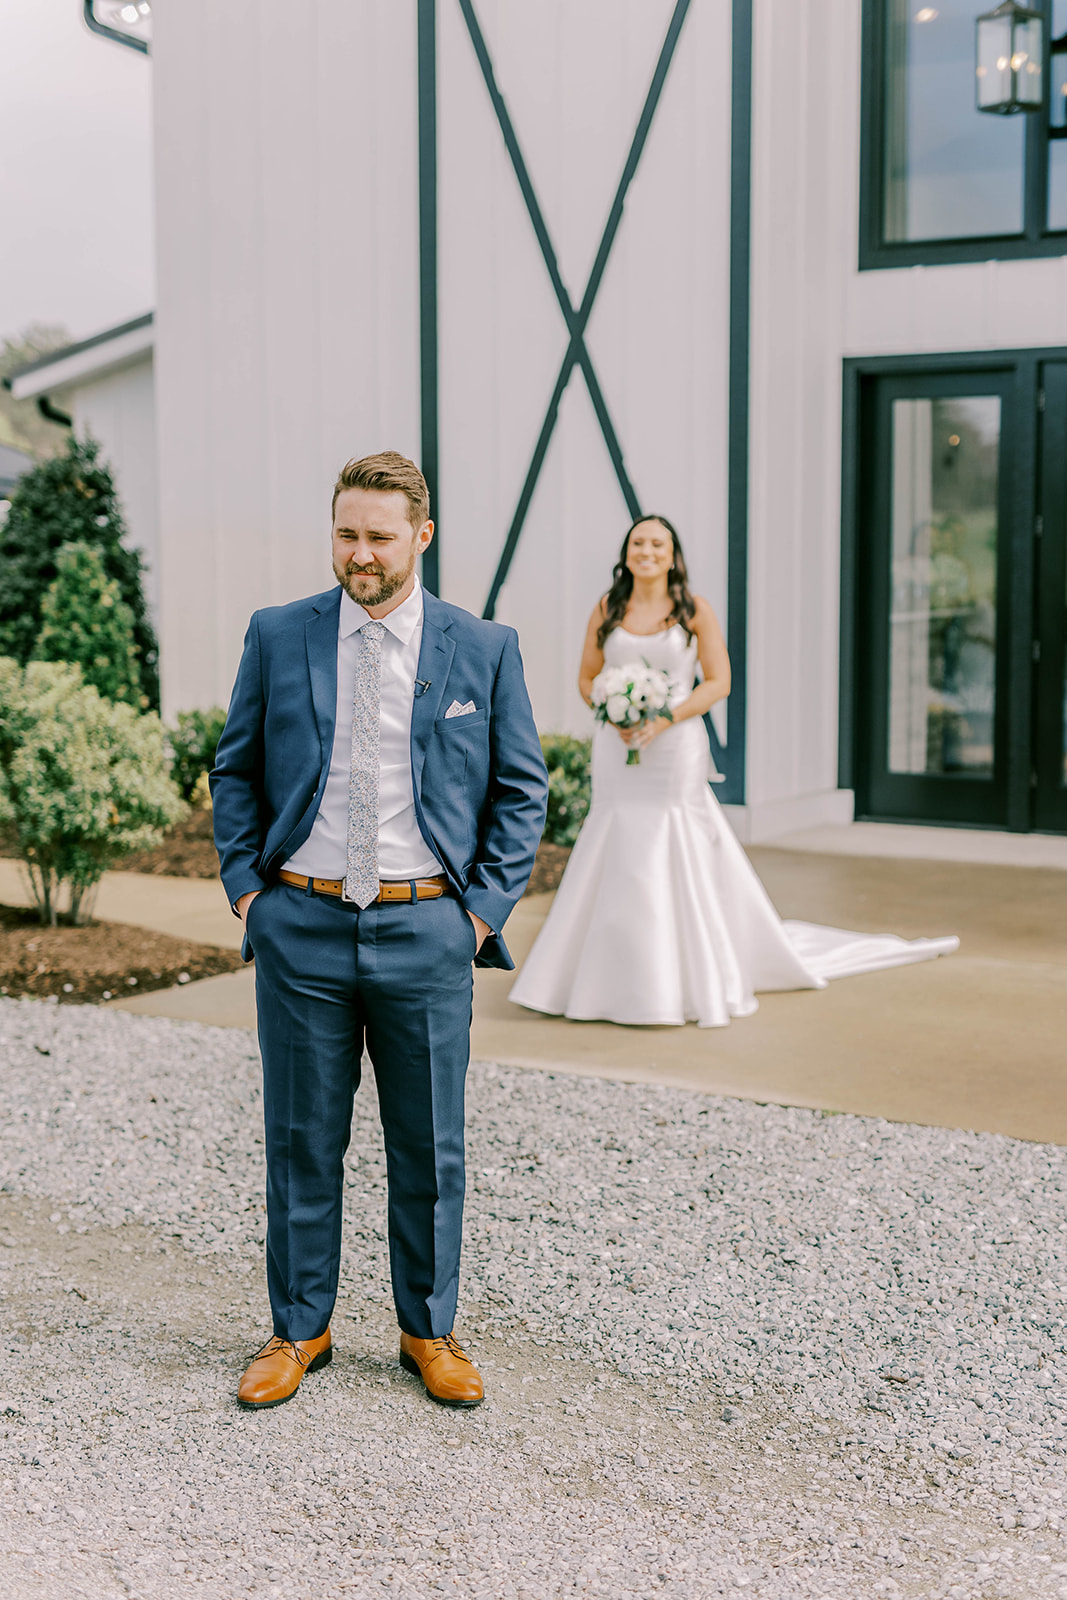 This Oakdale bride and groom had an emotional first look with tears and laughter shared.